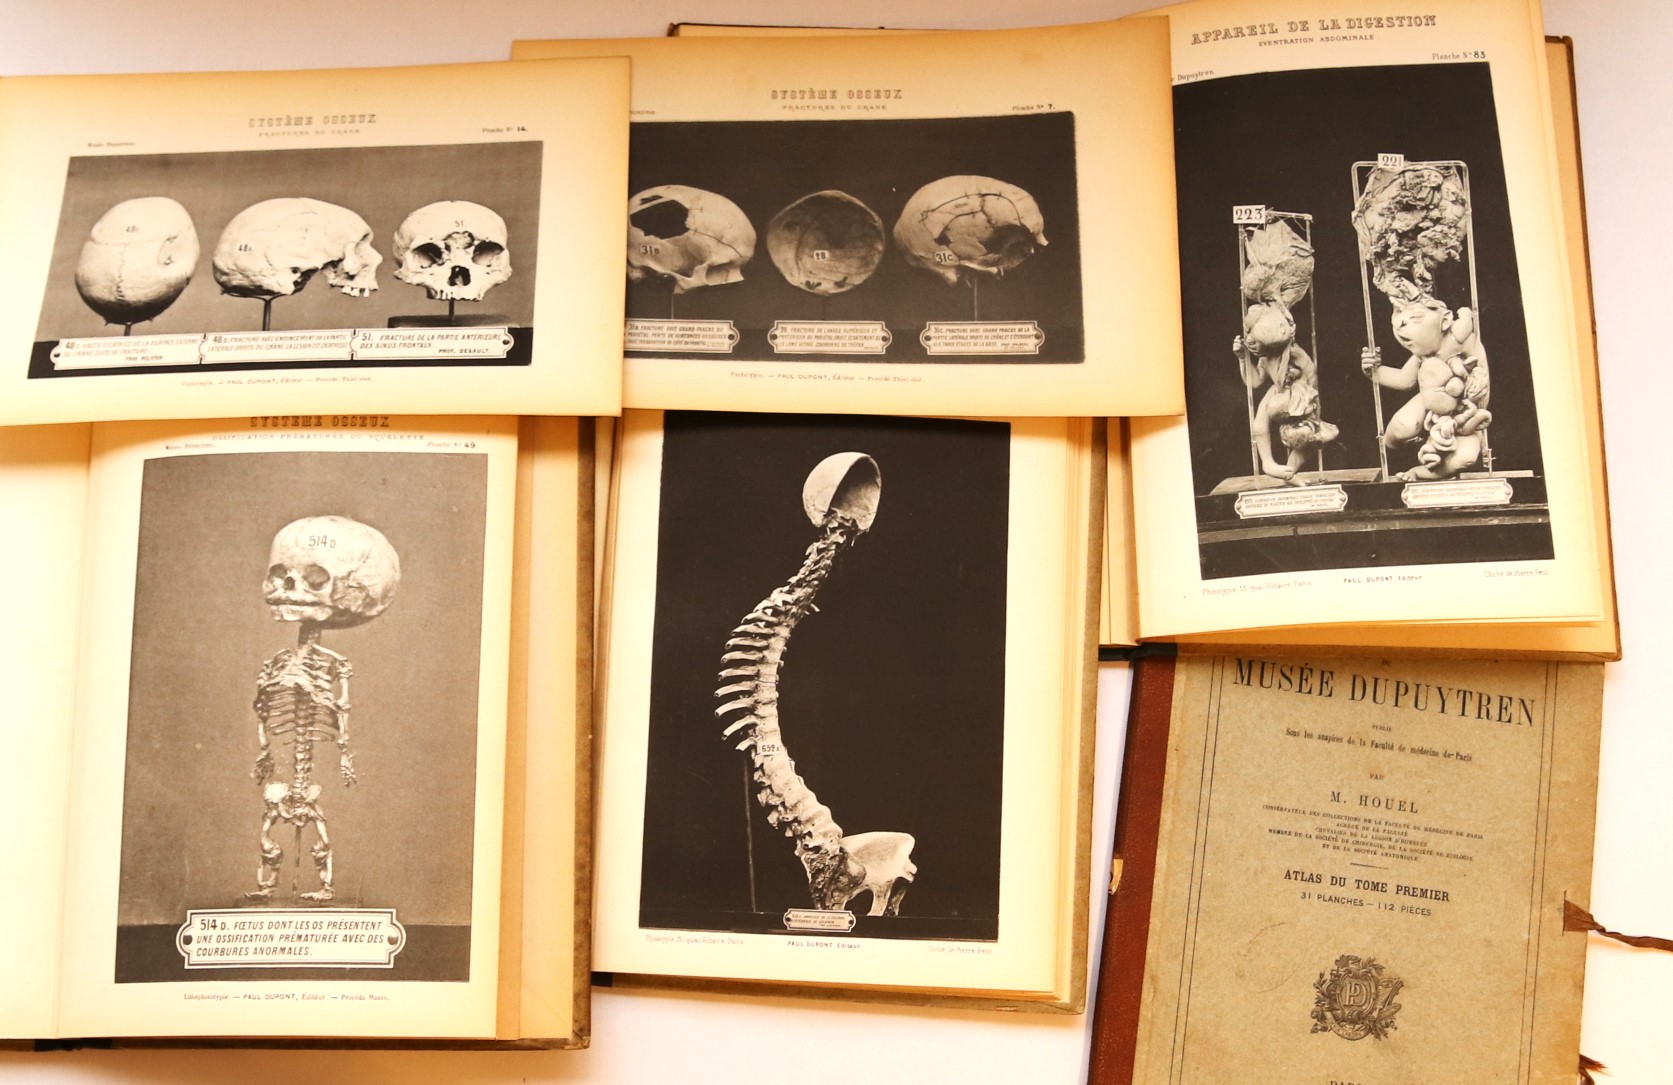 The scarce illustrated catalogue of the Dupuytren’s pathological anatomy Museum in Paris, 1877-1879